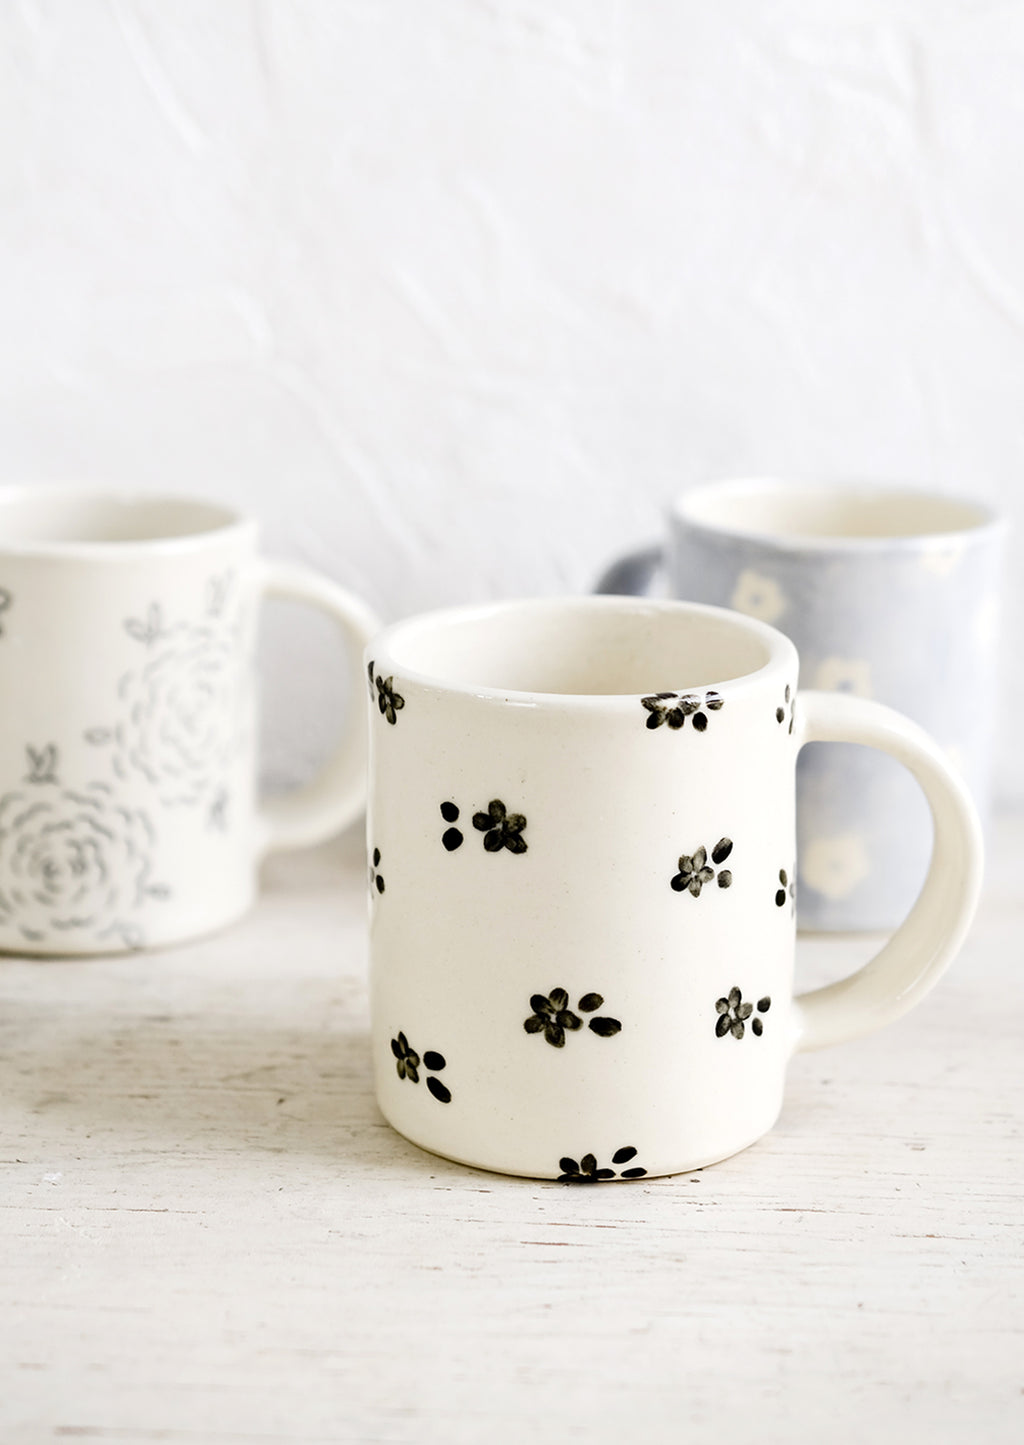 3: Handmade ceramic mugs in a variety of floral patterns and colors.